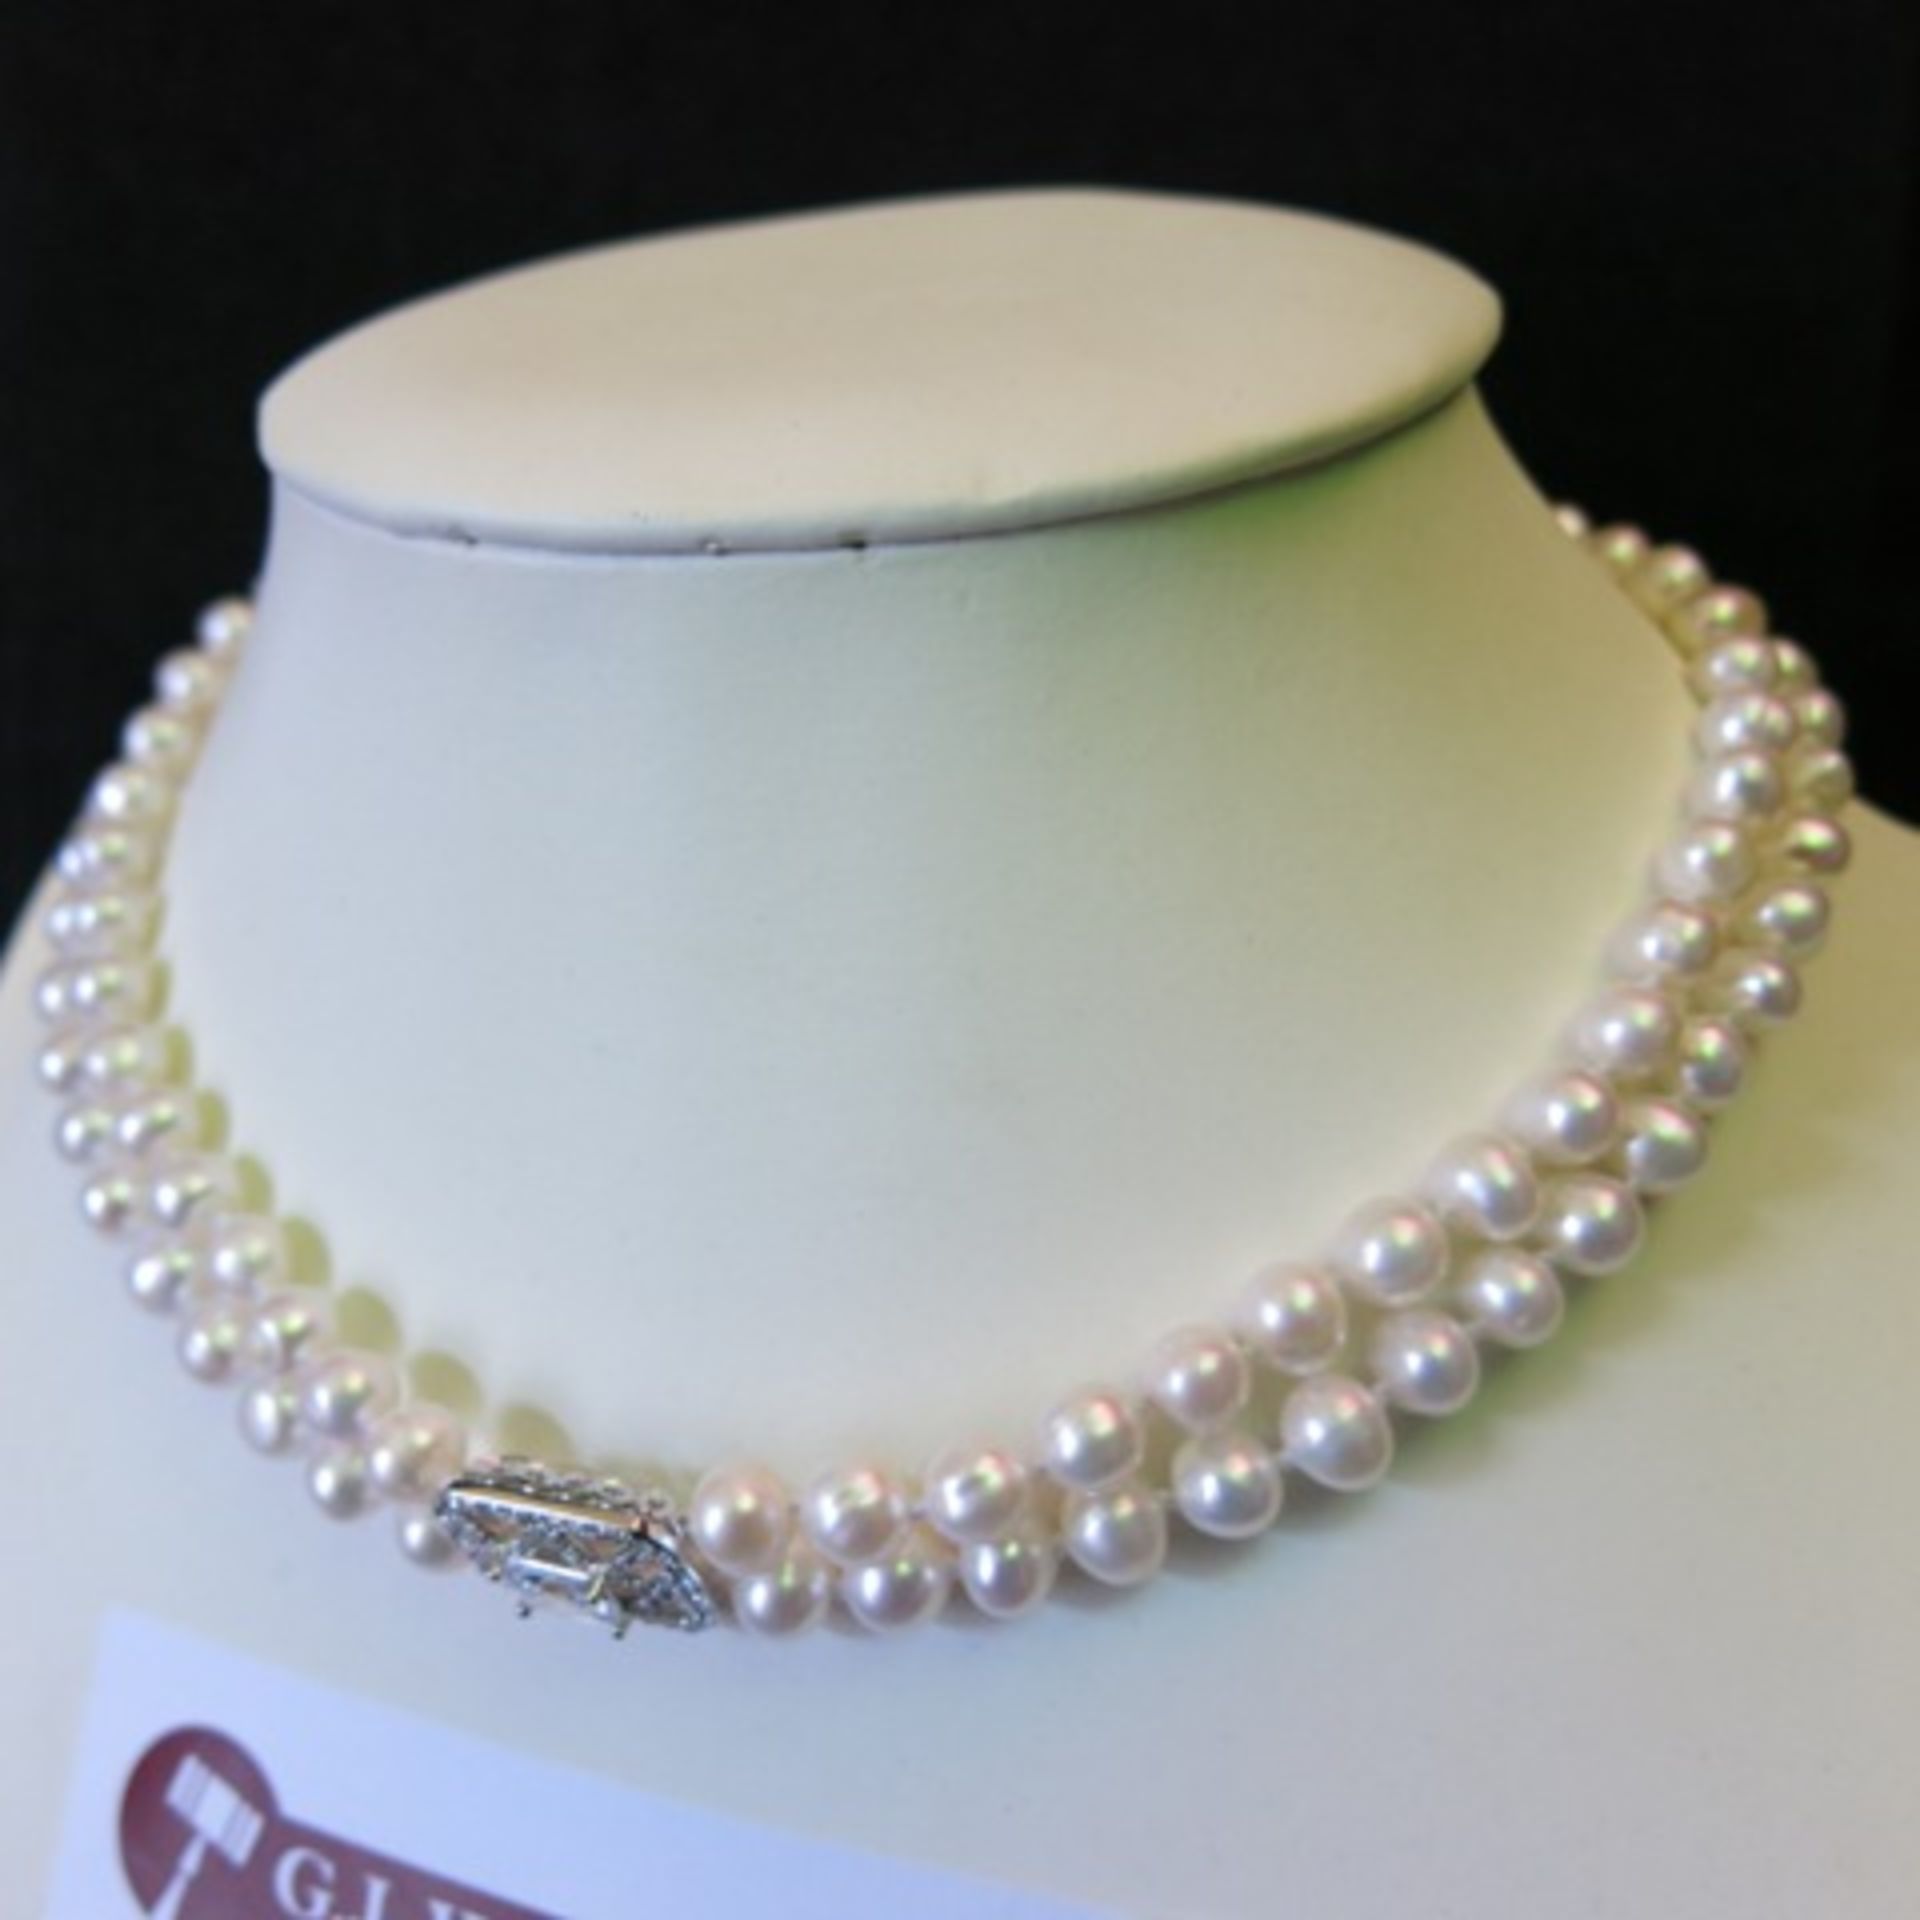 Double Band Pearl Necklace with Large & Small Clear Stone Centre Piece. RRP £226.00 - Image 2 of 3